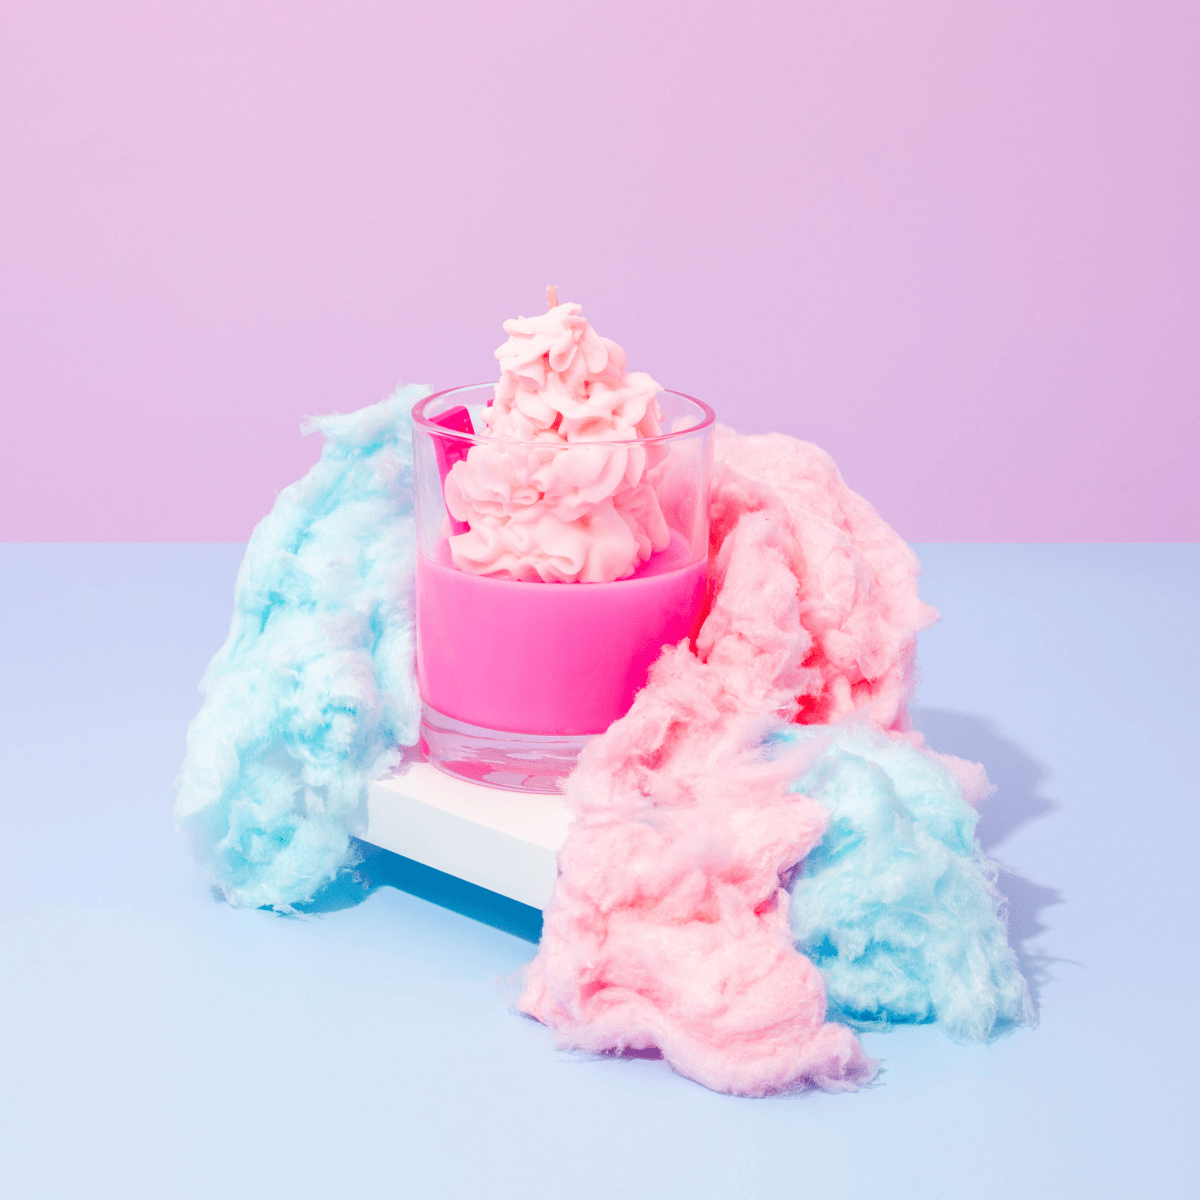 Cotton Candy - Candle